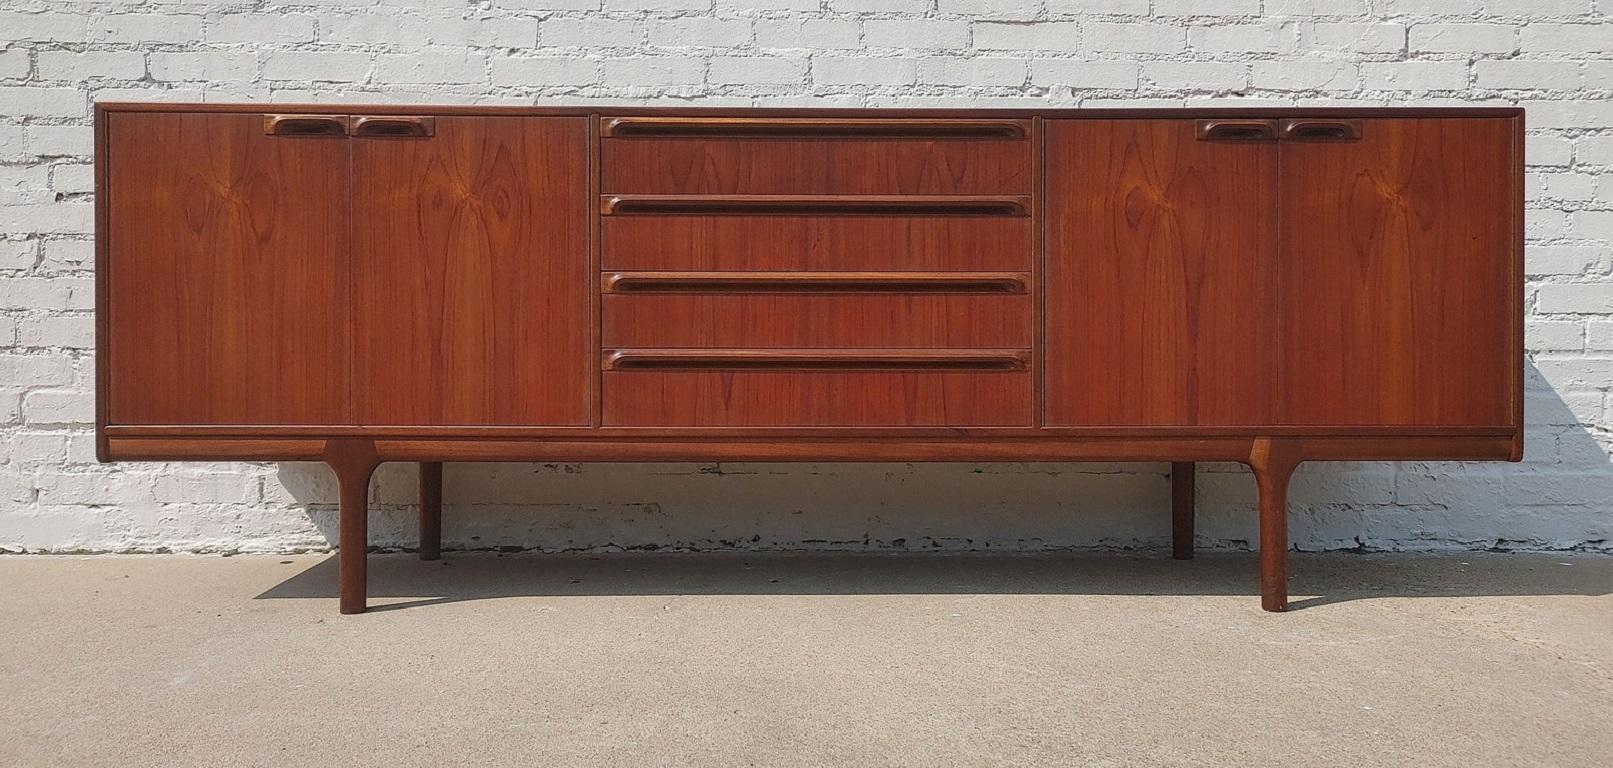 Mid Century Modern Teak English Sideboard by McIntosh

Above average vintage condition and structurally sound. Has some expected finish wear and scratching. Has dings on several edges. Please zoom on the listing pics. Outdoor listing pictures might